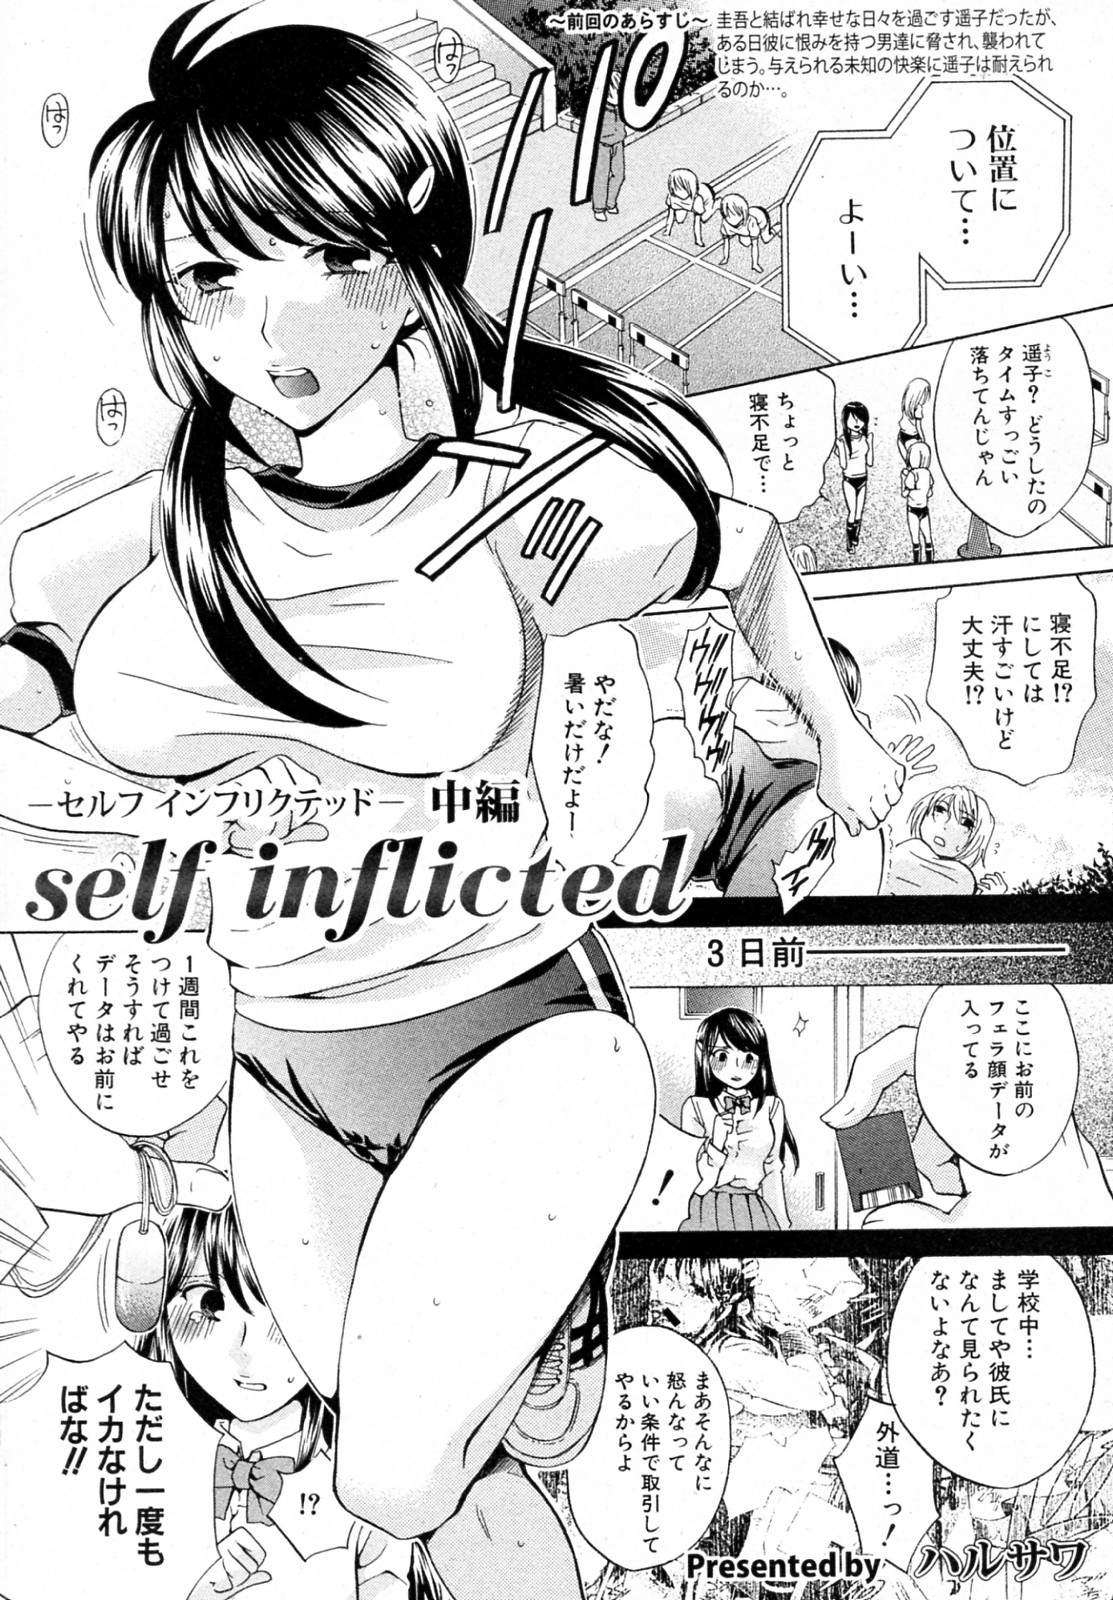 [Harusawa] self inflicted (Complete) [ハルサワ] self inflicted 前・中・後編